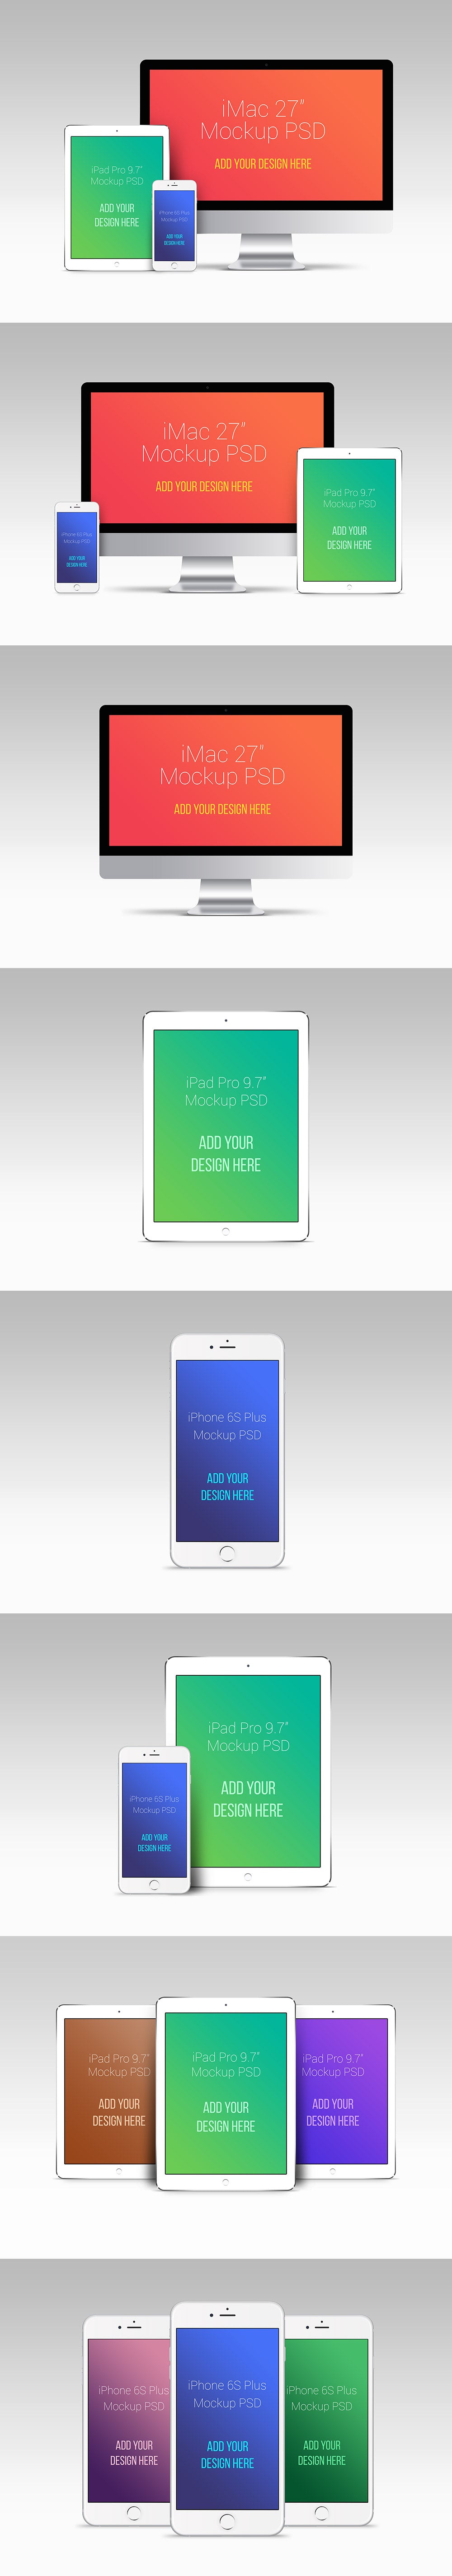 Free Modern and Realistic Apple Devices PSD Mockup Templates